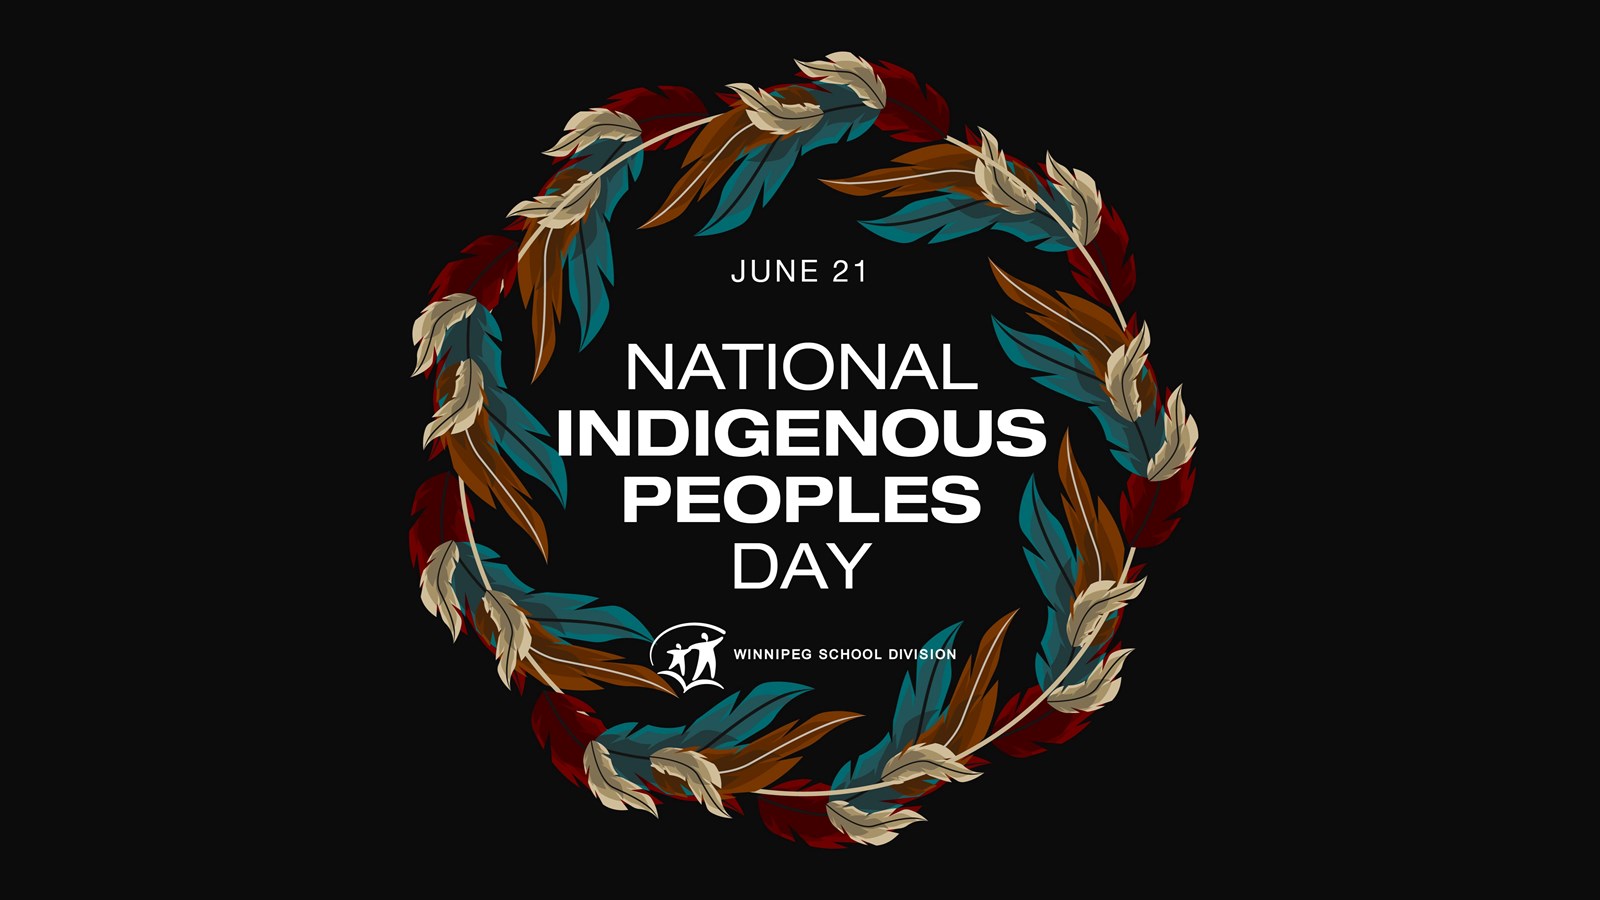 National Indigenous Peoples Day June 21